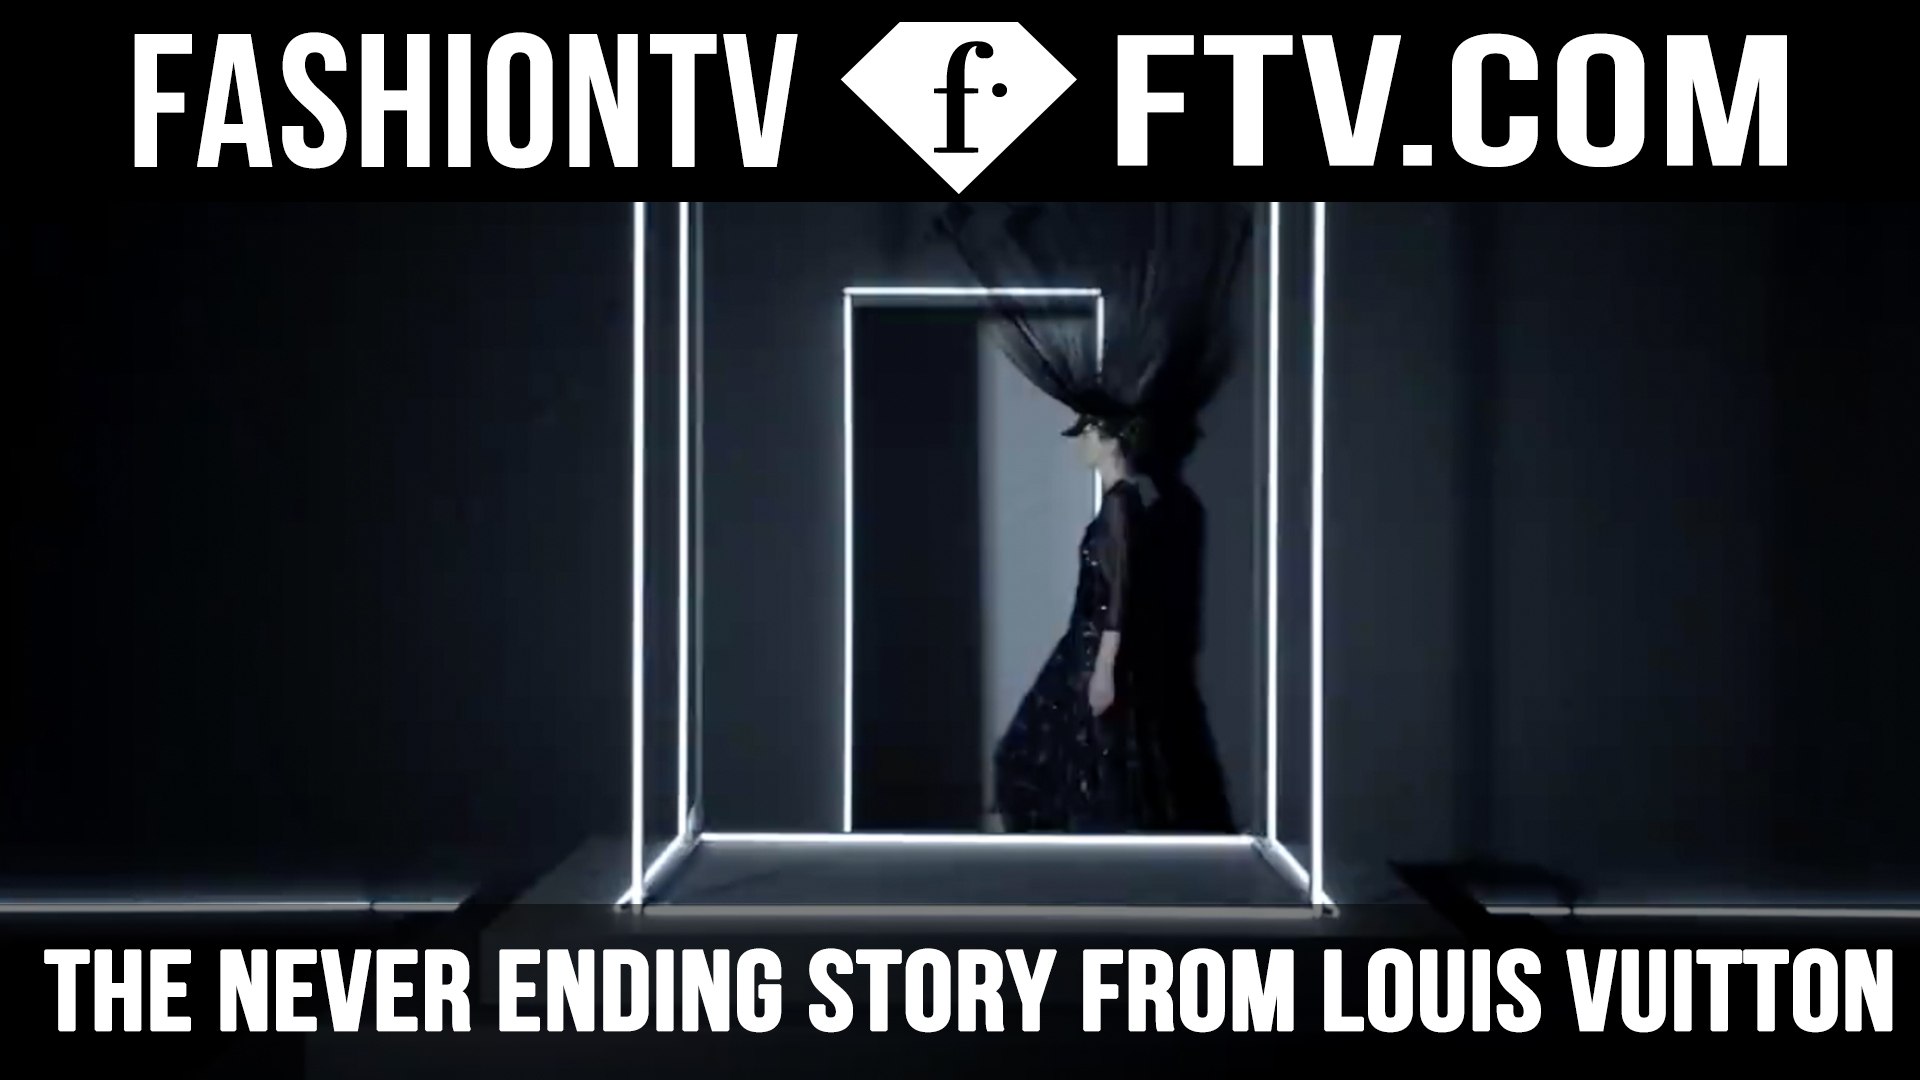 The Neverending Story: Louis Vuitton fever